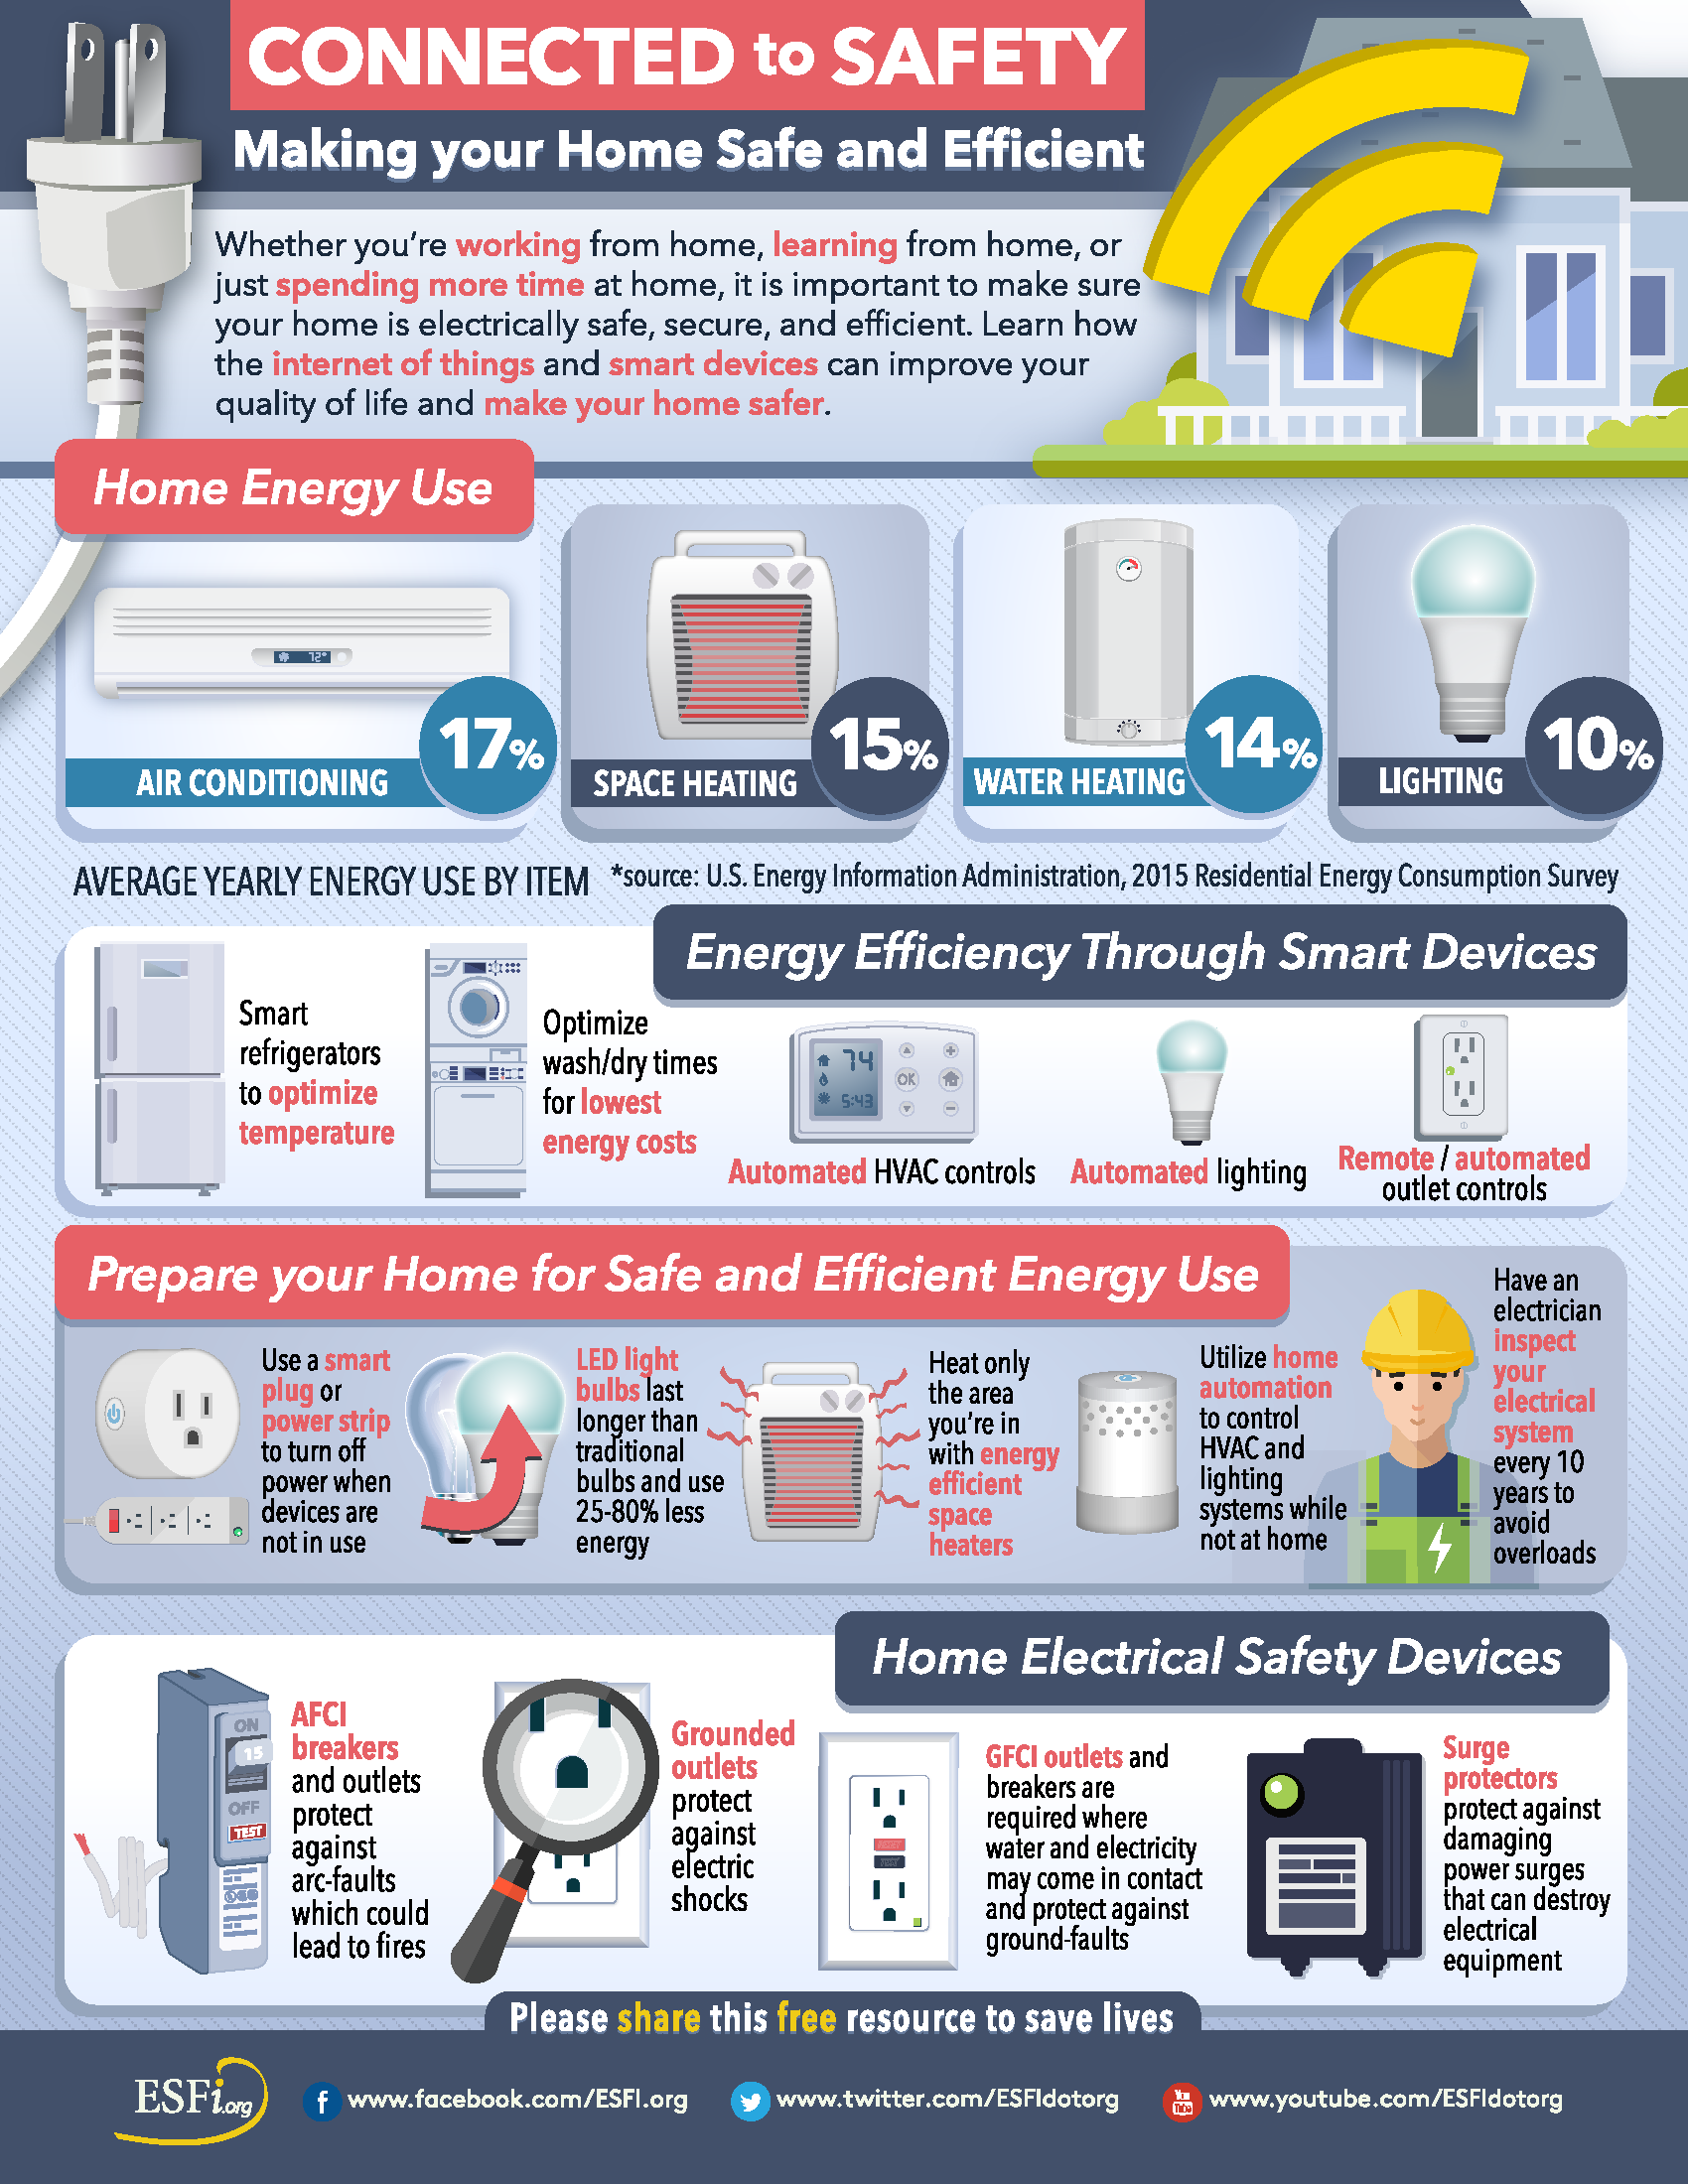 Making-Your-Home-Safe-And-Efficient-Connected-To-Safety-C992.png